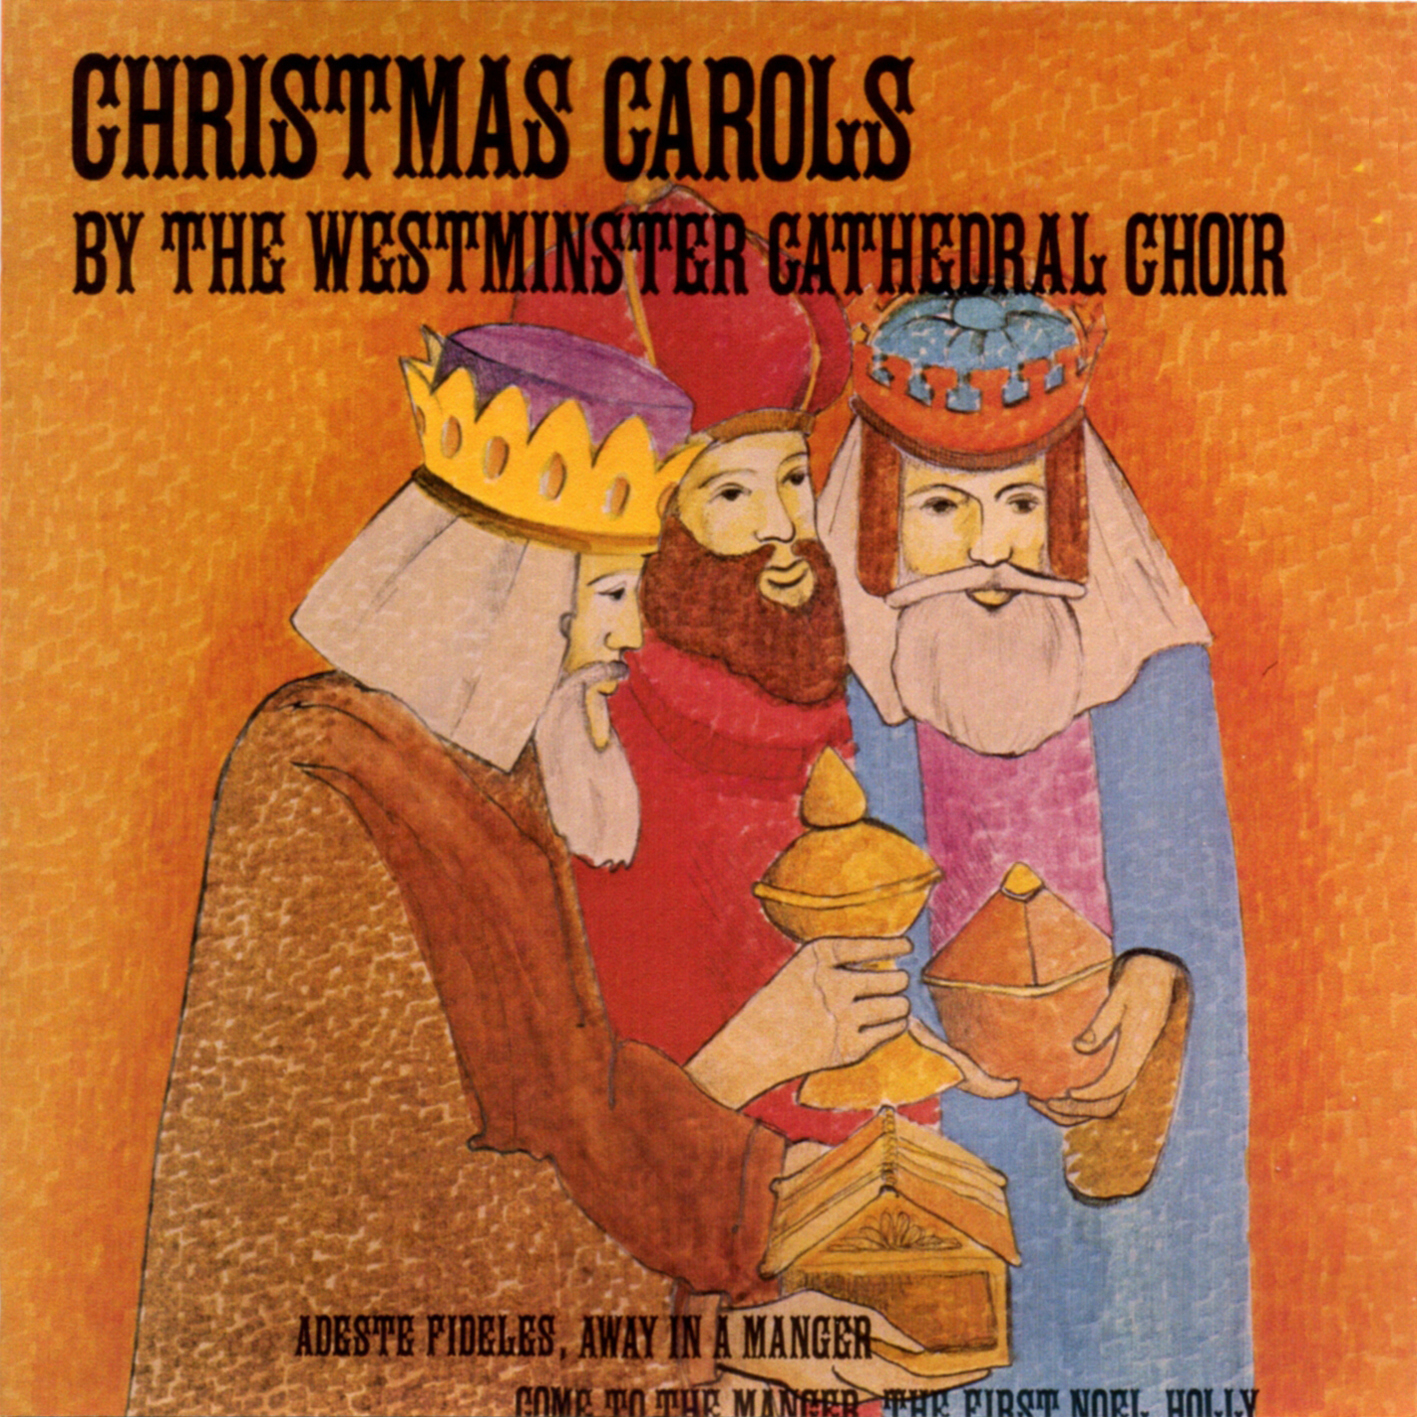 Christmas Carols by The Westminster Cathedral Choir